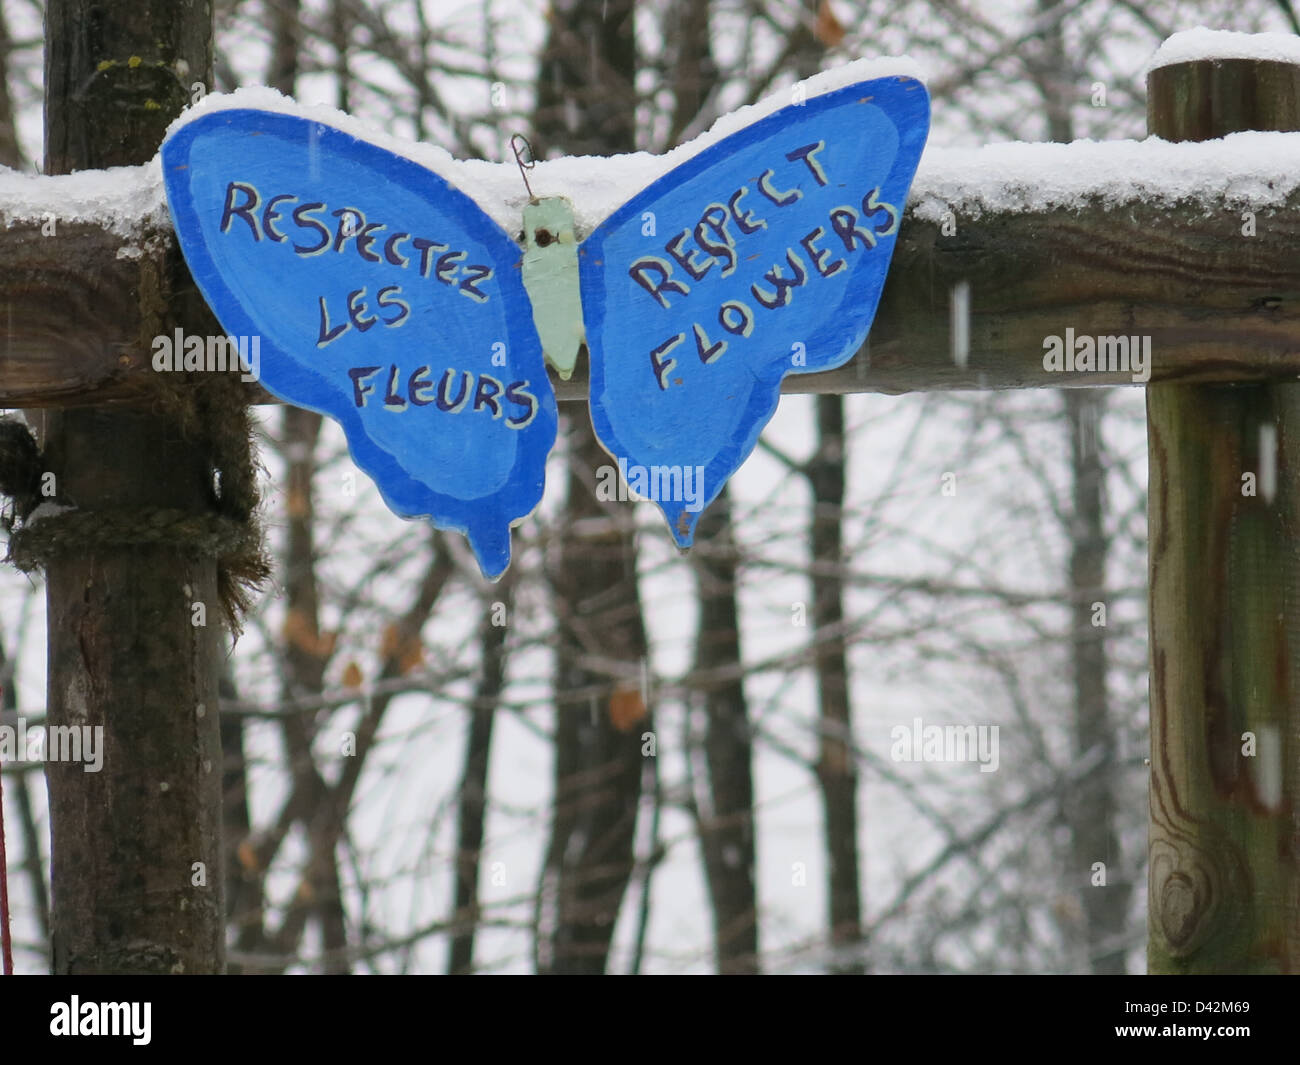 Snow covered butterfly shaped sign in French 'respectez les fleurs' and in English 'respect flowers'. Stock Photo